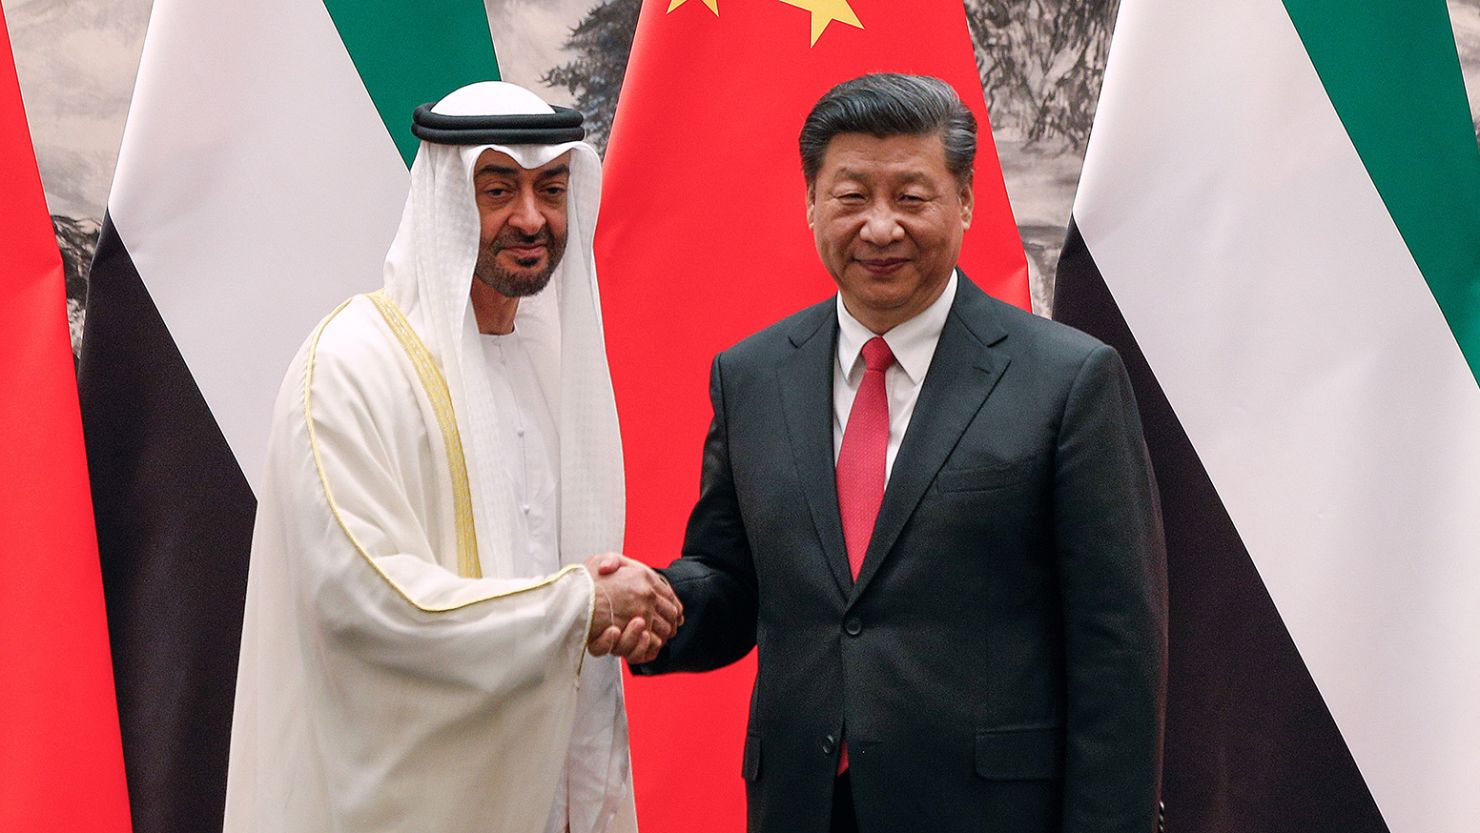 In nuclear push, Saudi Arabia could play US, China off each other